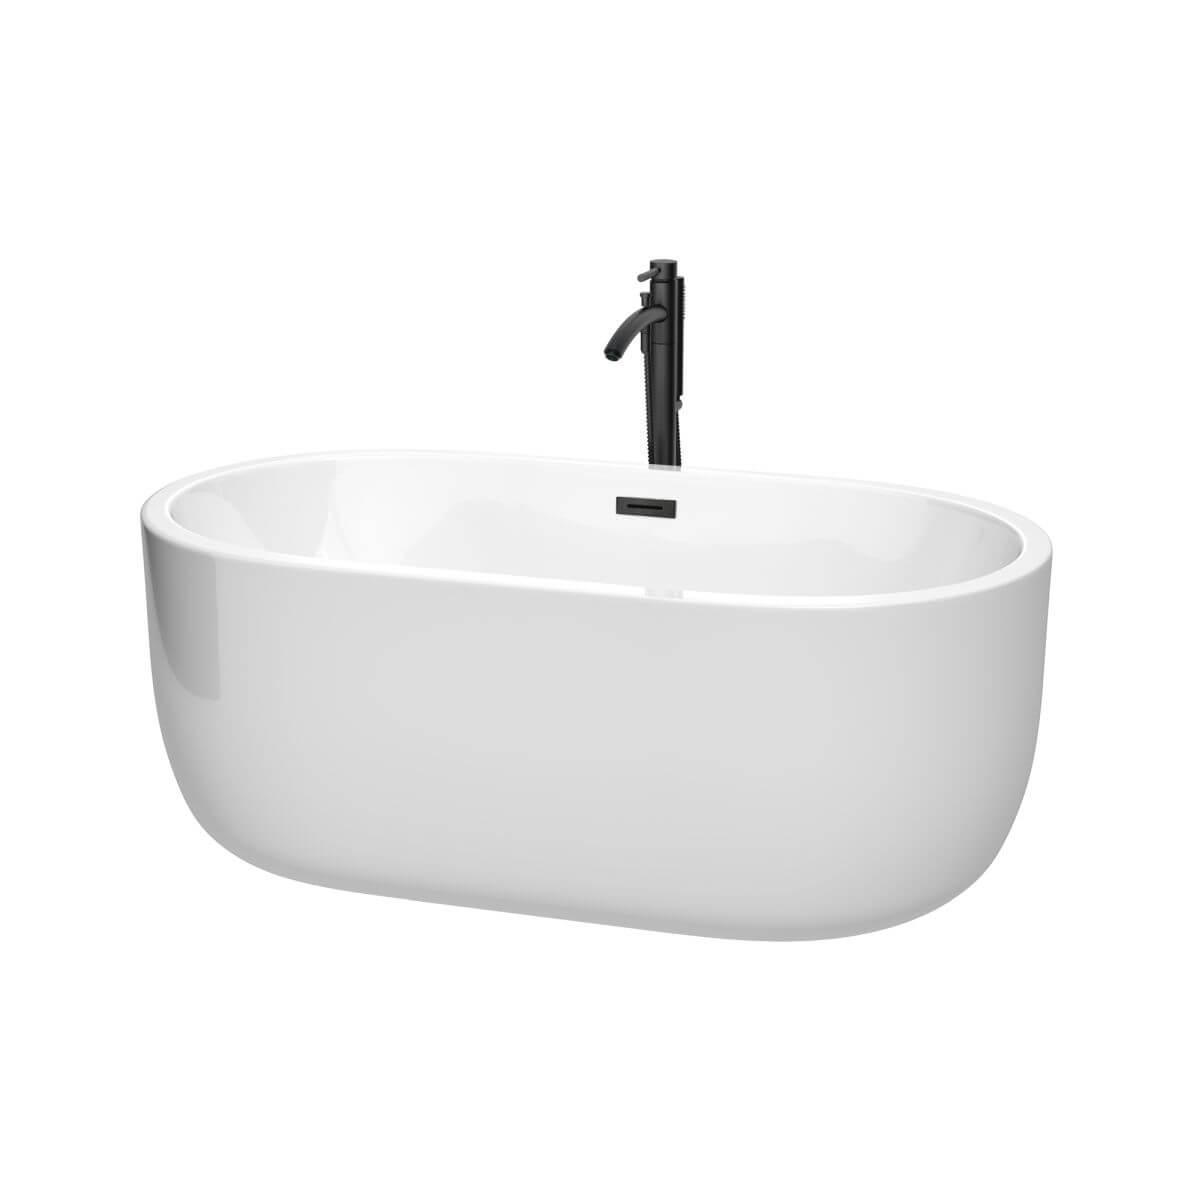 Wyndham Collection Juliette 60 inch Freestanding Bathtub in White with Floor Mounted Faucet, Drain and Overflow Trim in Matte Black - WCOBT101360MBATPBK